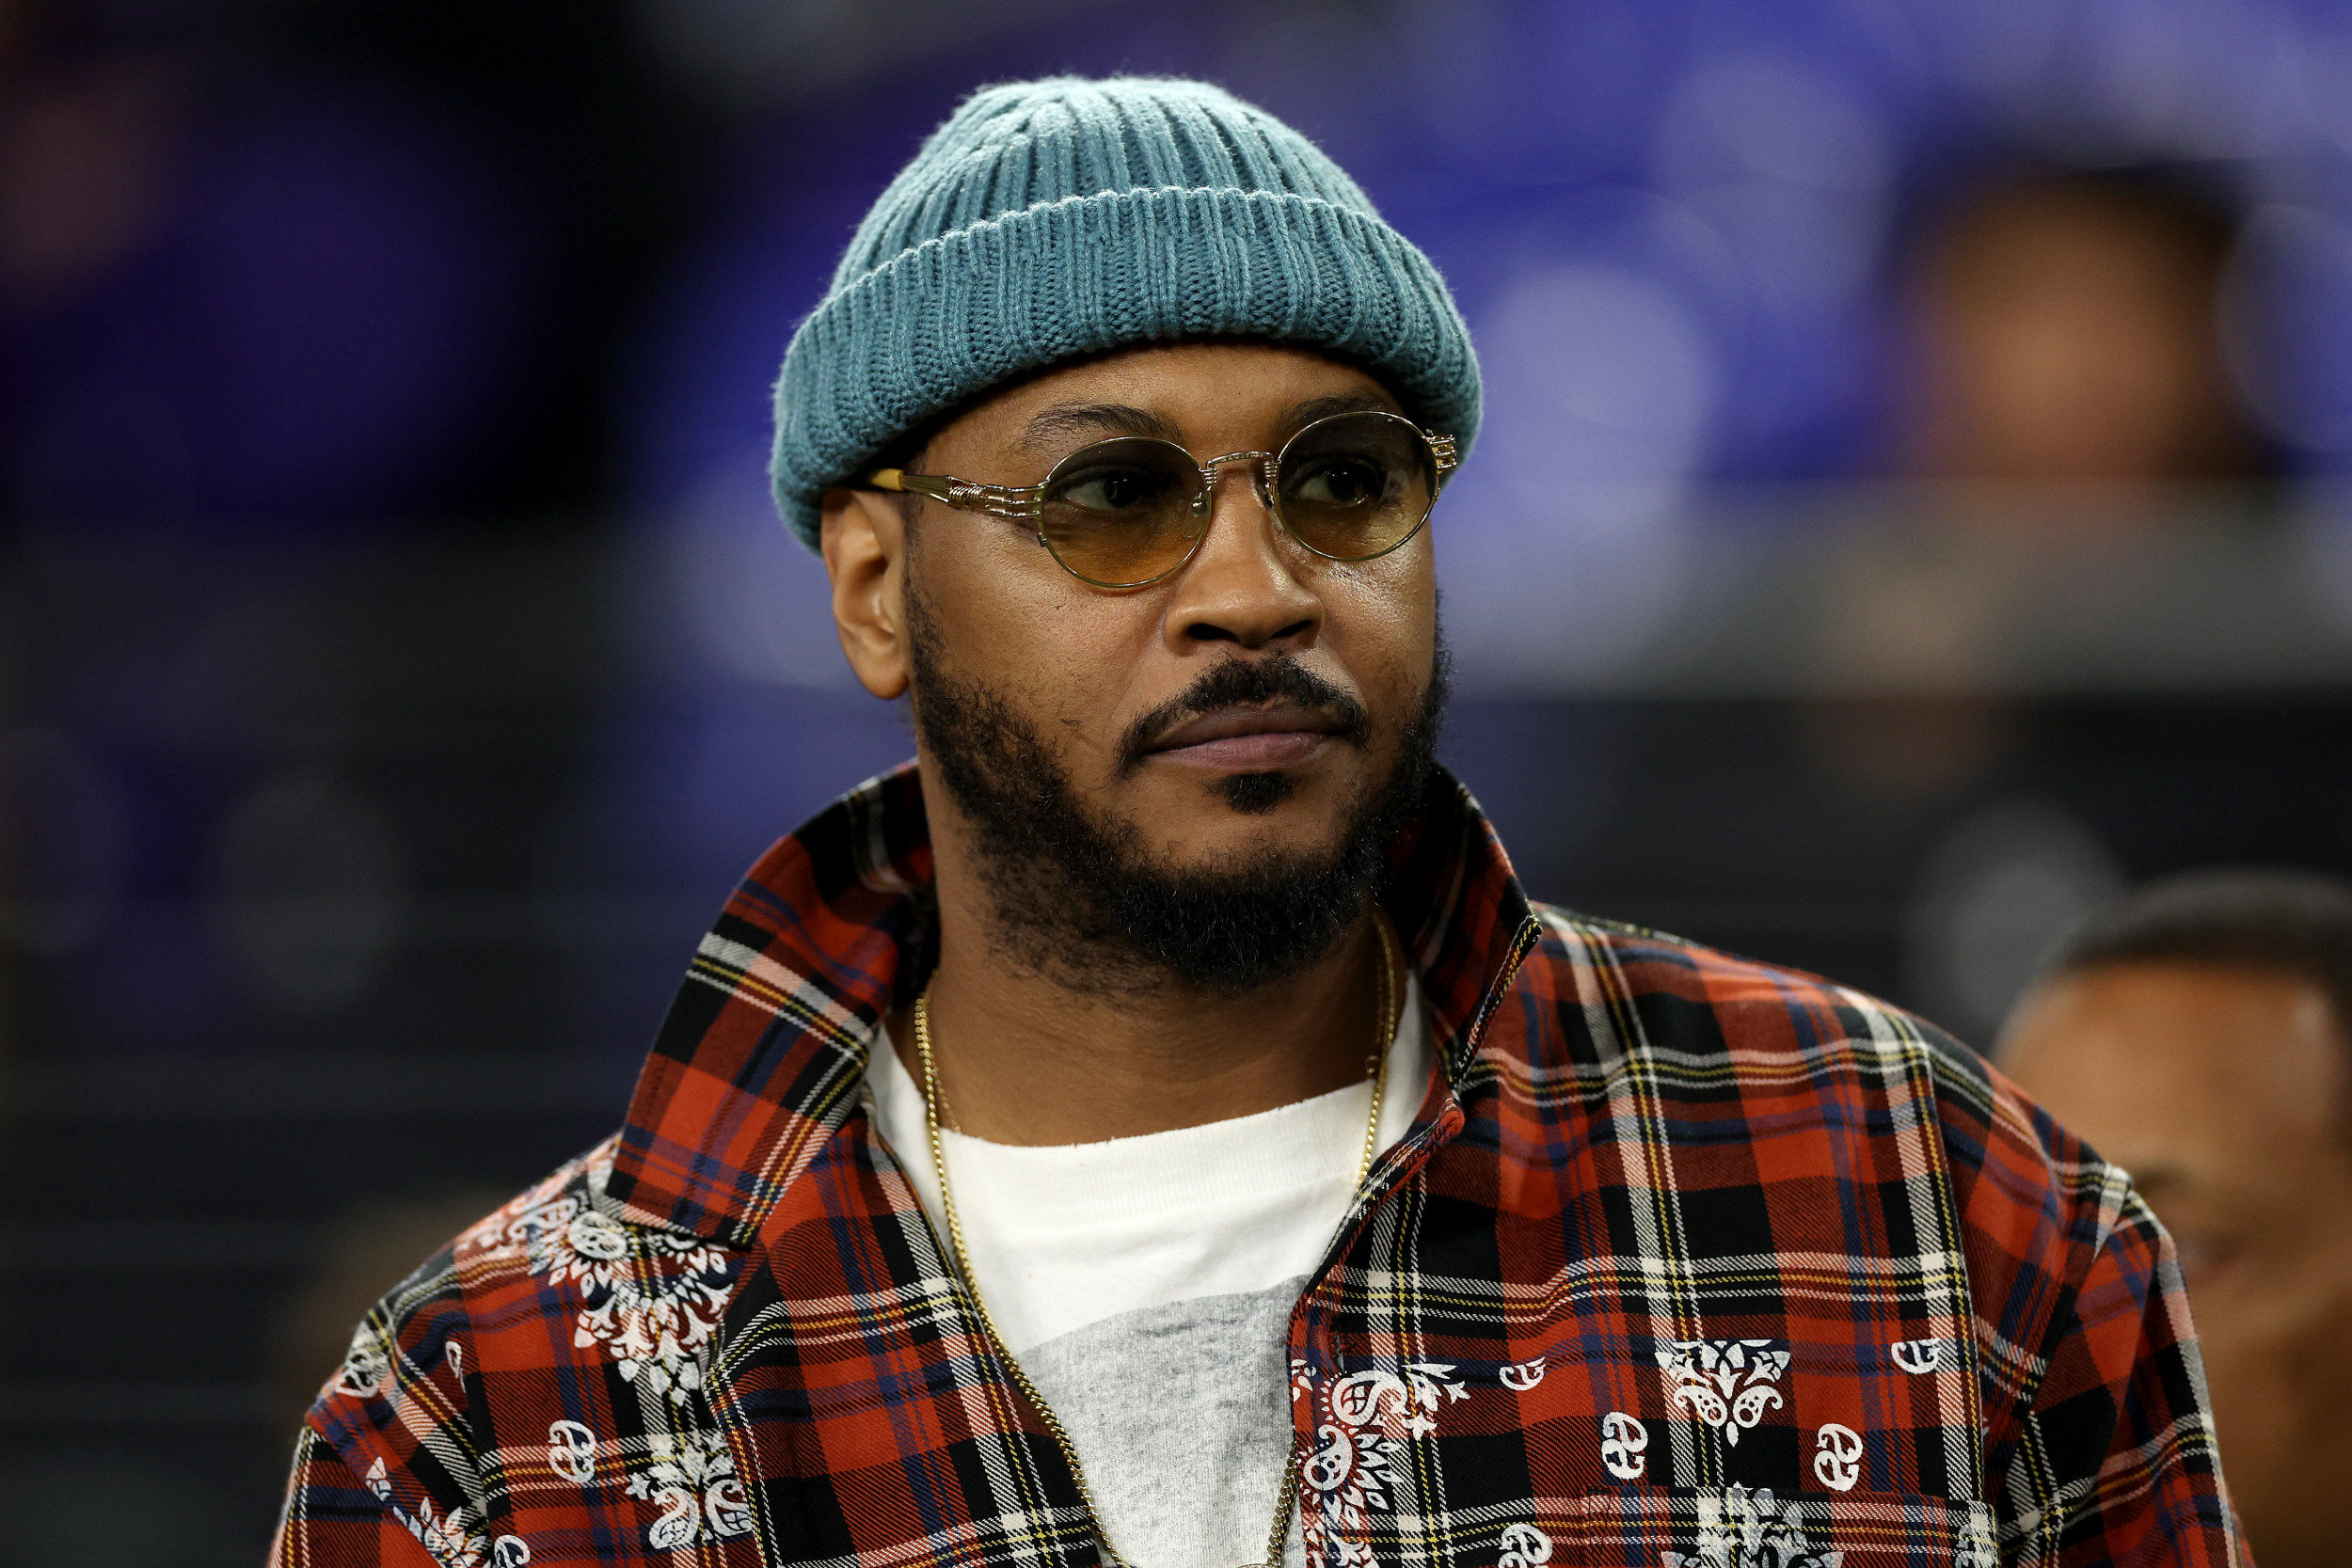 Carmelo Anthony opens up about his departure from the New York